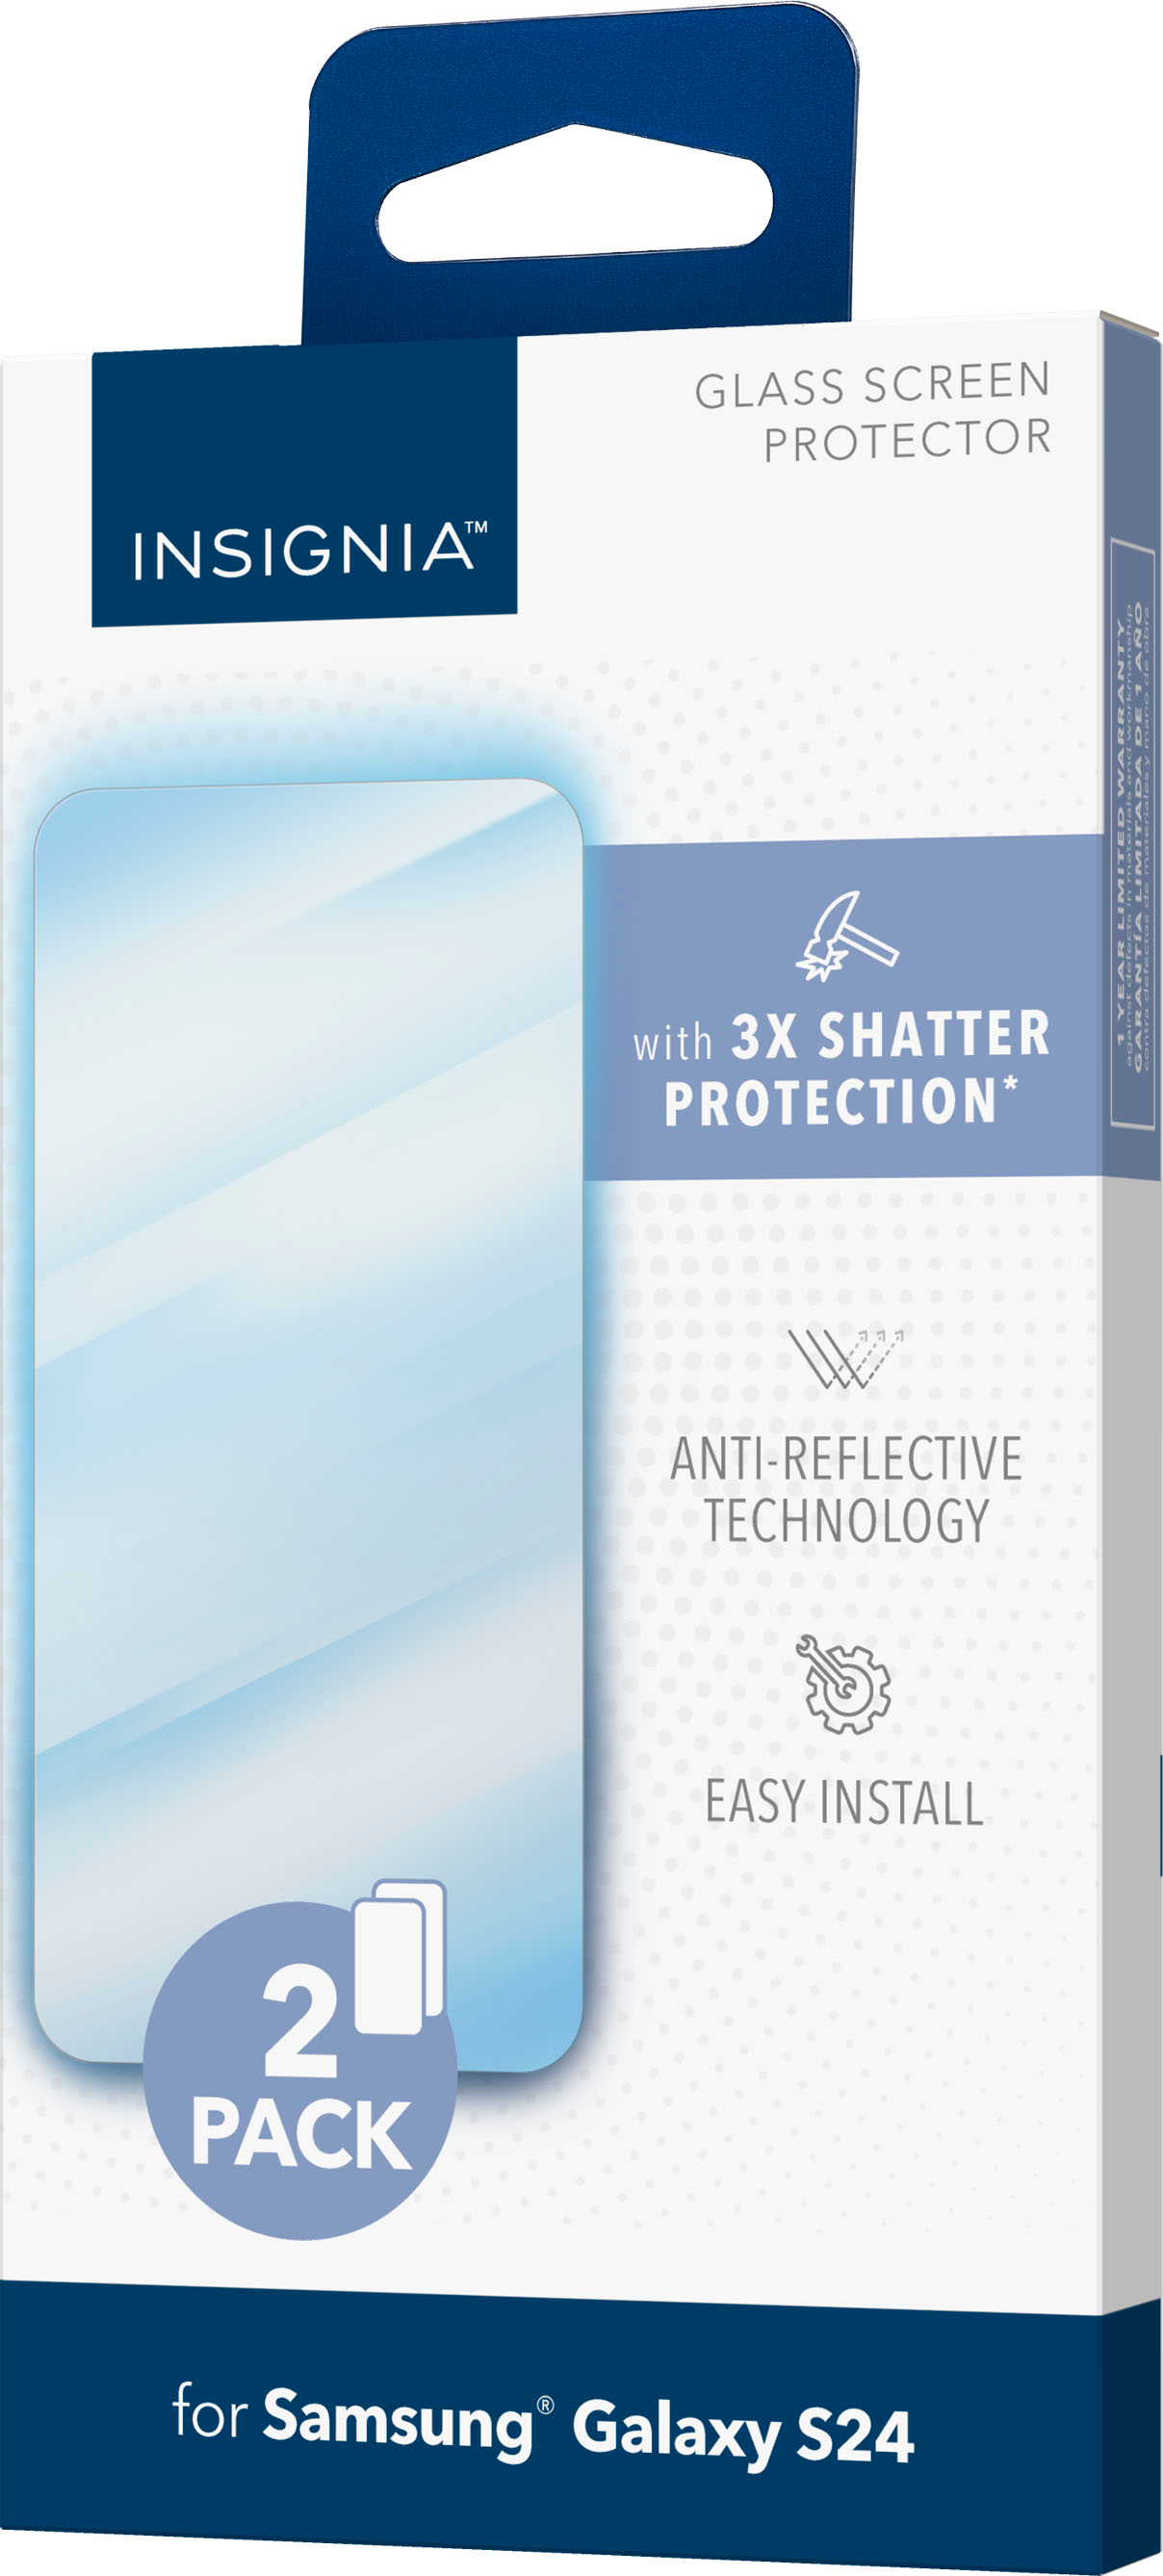 Insignia Clear 2x Reinforced HD Glass Screen Protector for Samsung Galaxy S24 | Best Buy